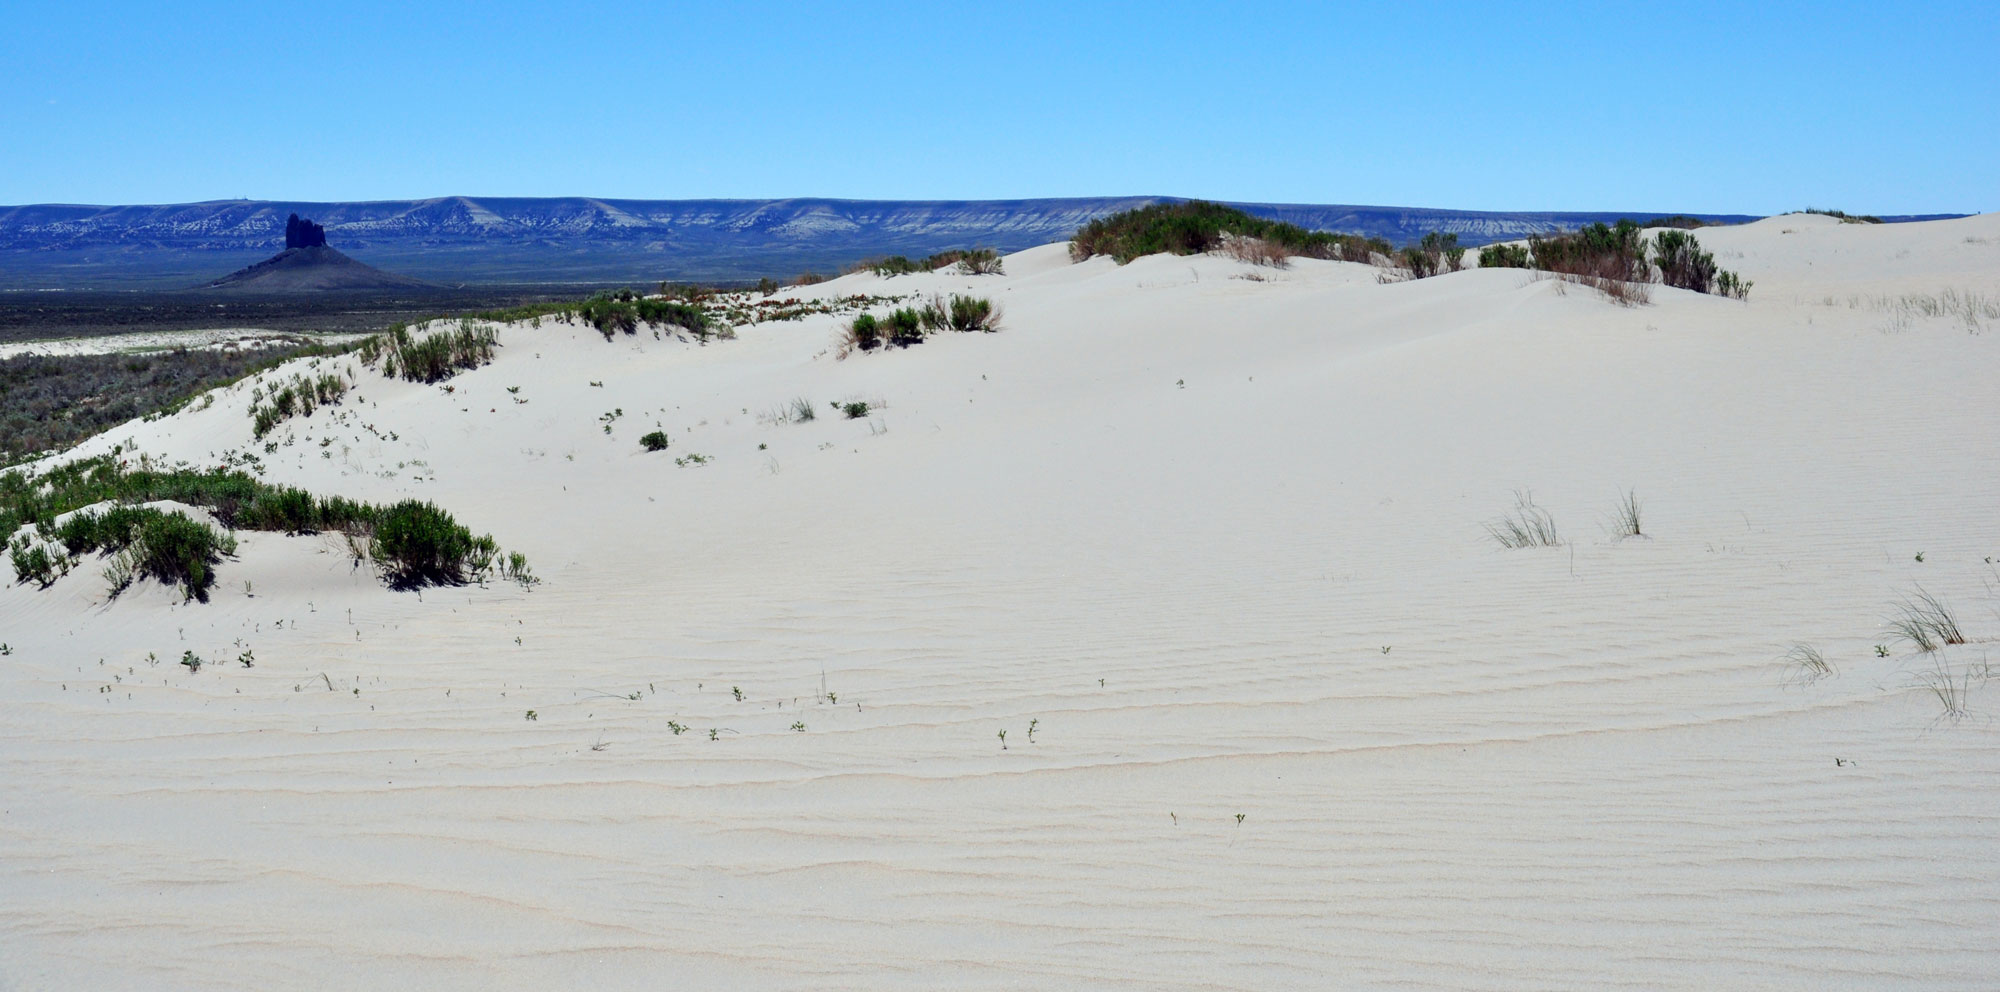 Photograph of Killpecker Sand Dunes in Wyoming. The photo shows a patch of off-white sand forming a low hill with sparse vegetation near its crest. In the background, a lone rock formation and distant low hills can be on the edge of a plain.